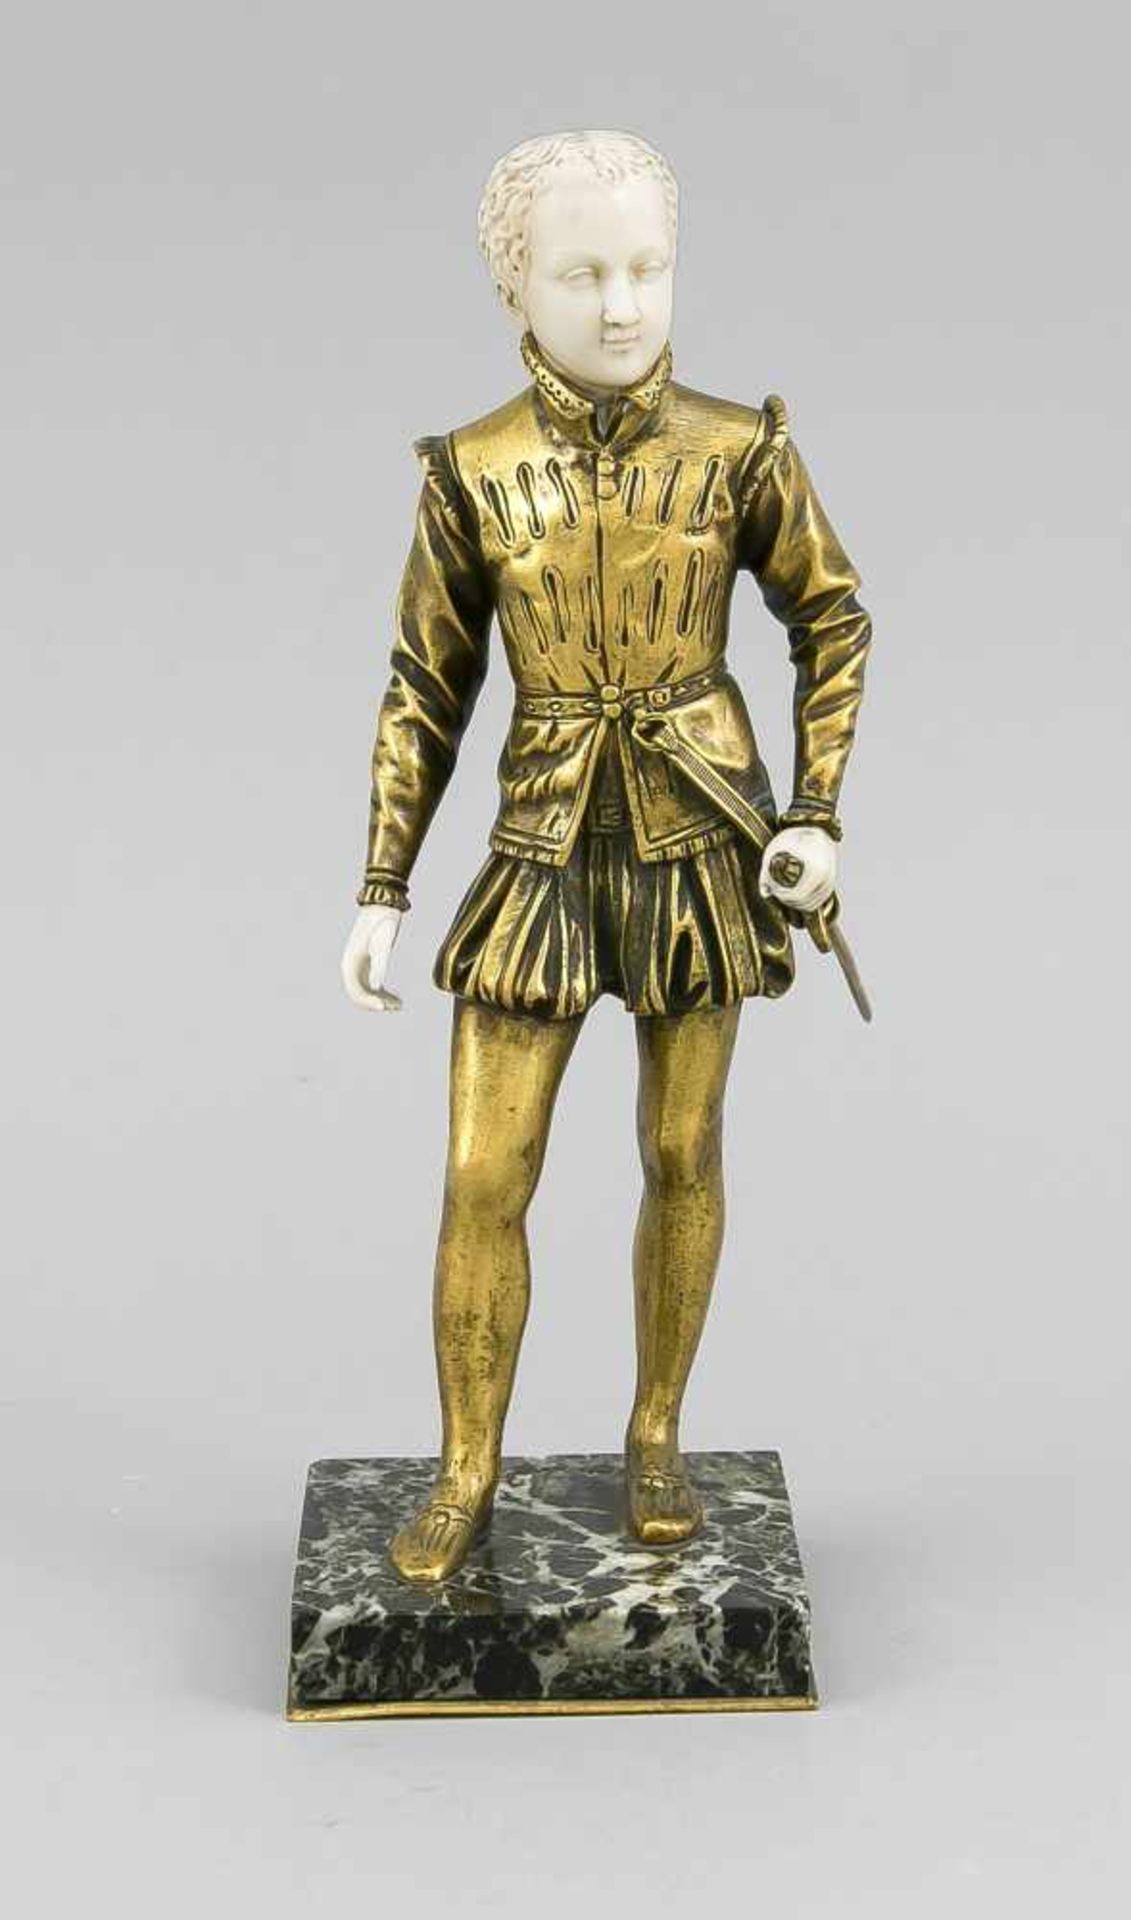 Sculptor around 1900, Chryselephantine figure of a Spanish or Italian young nobleman inthe